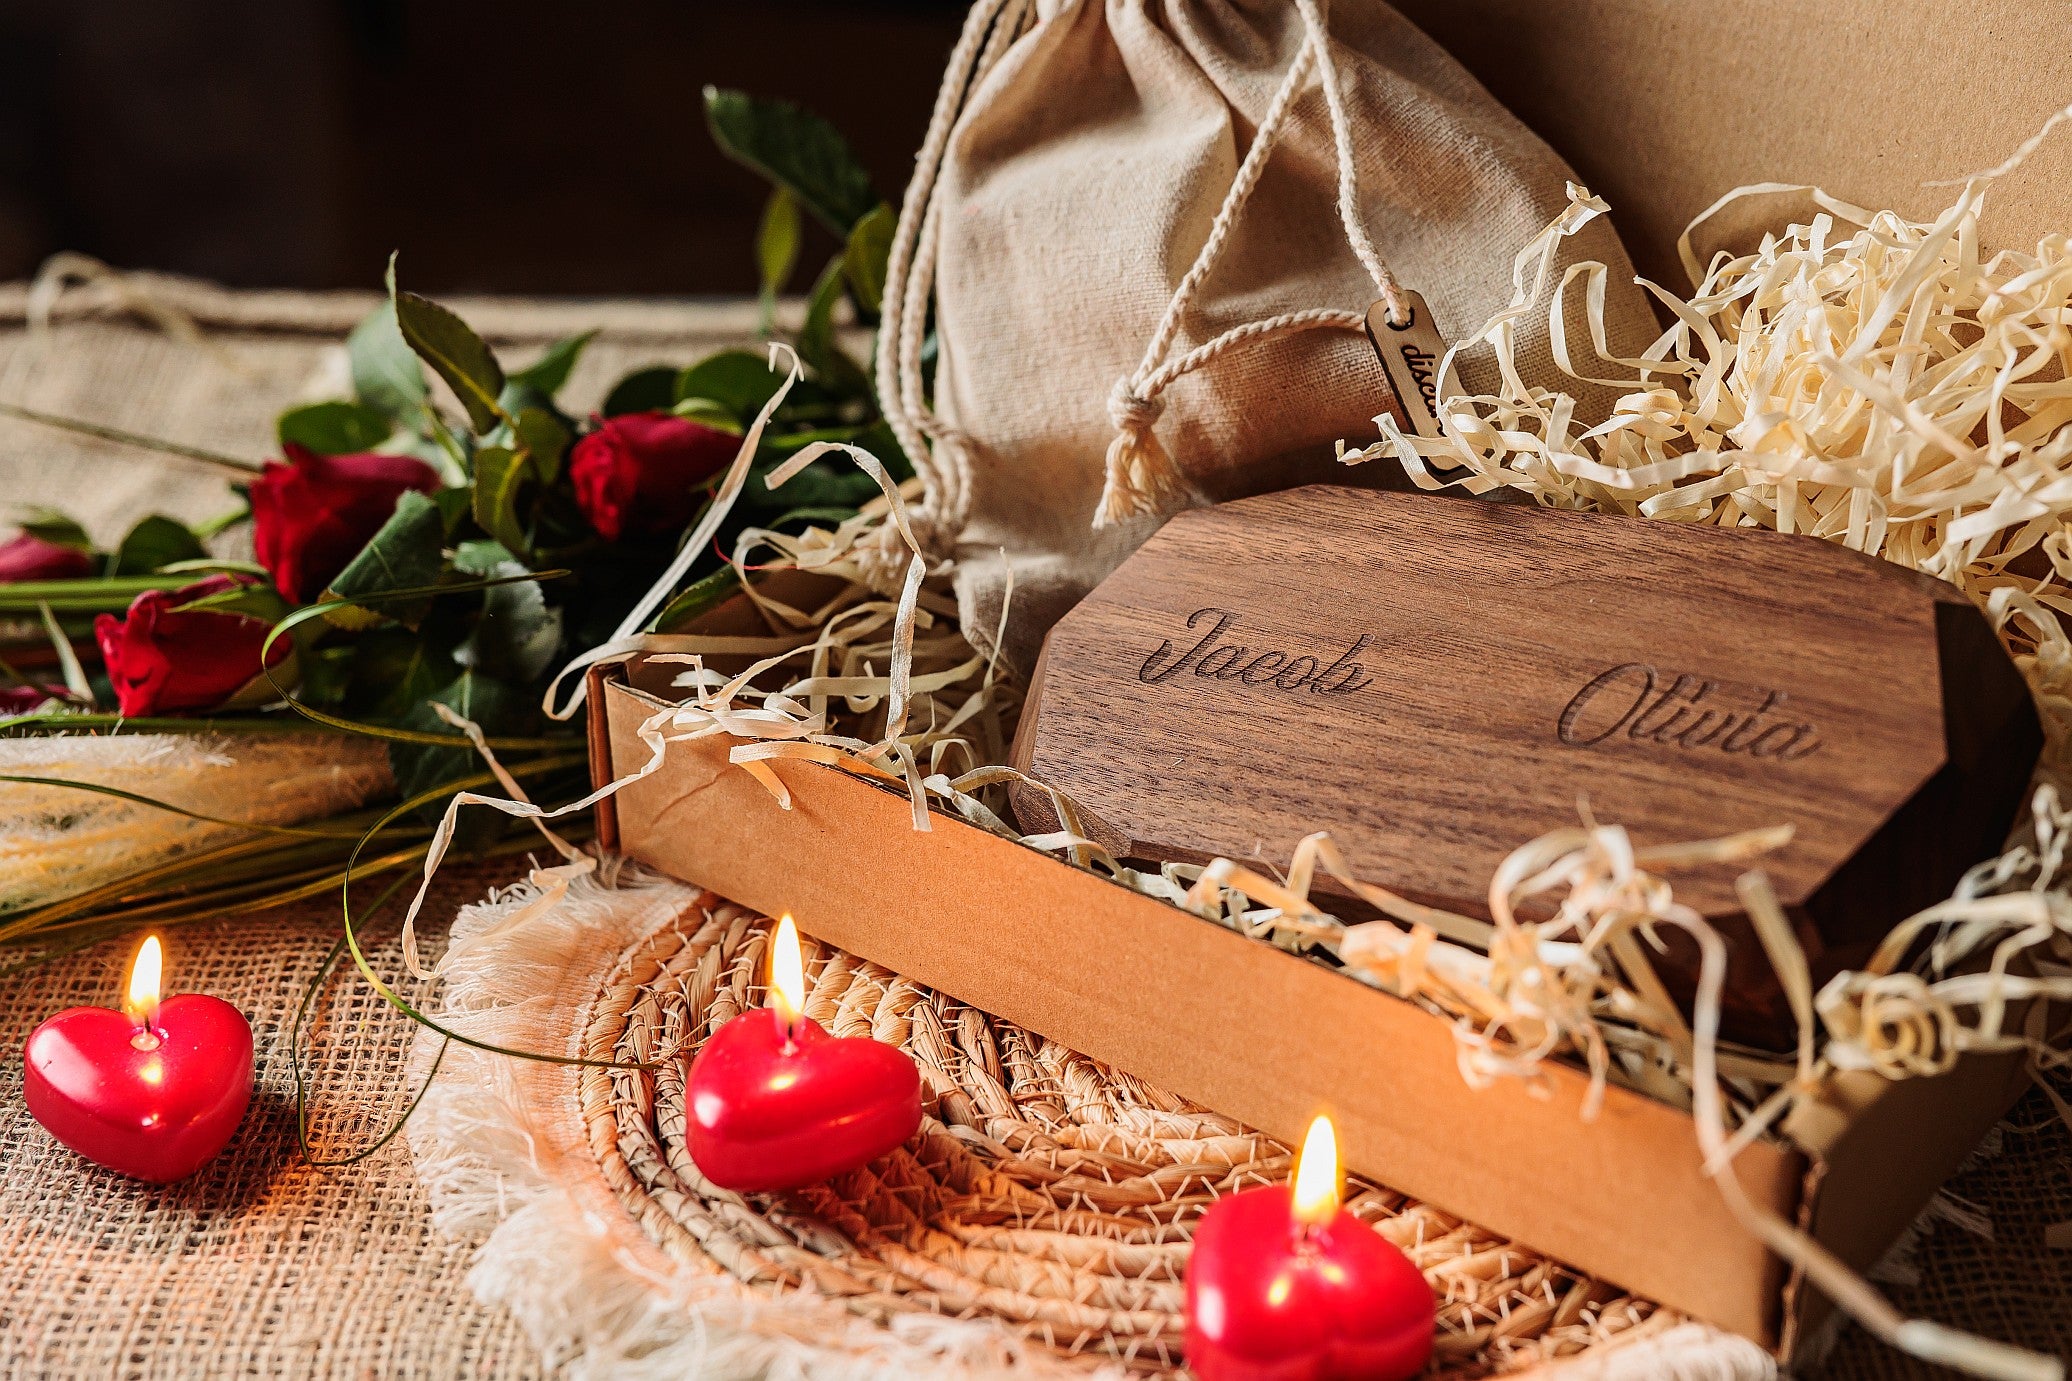 Gift Ideas for a Wooden Anniversary